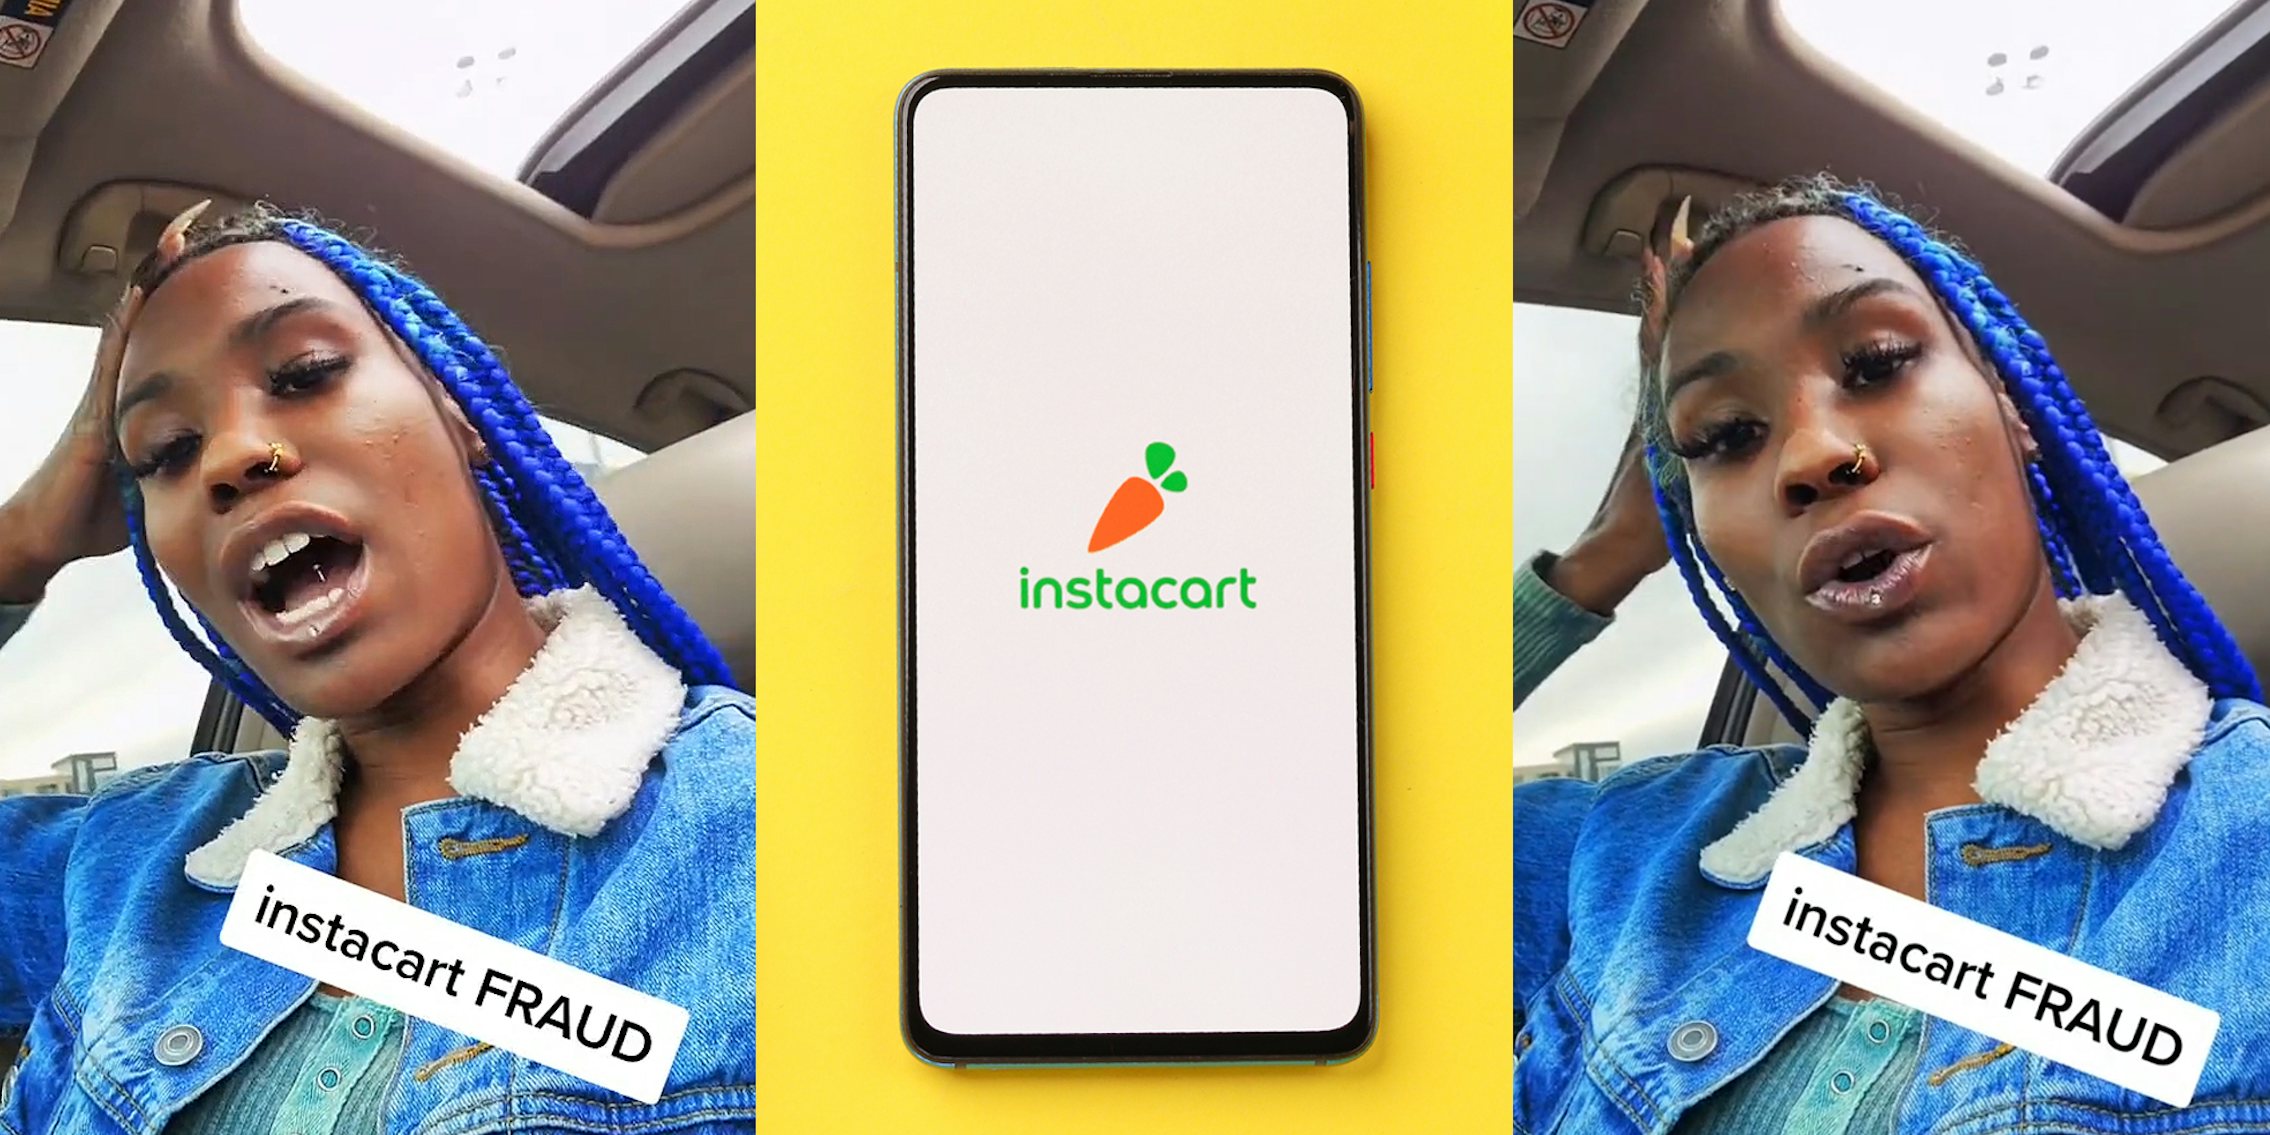 woman speaking in car caption 'instacart FRAUD' (l) Instacart on phone on yellow background (c) woman speaking in car caption 'instacart FRAUD' (r)